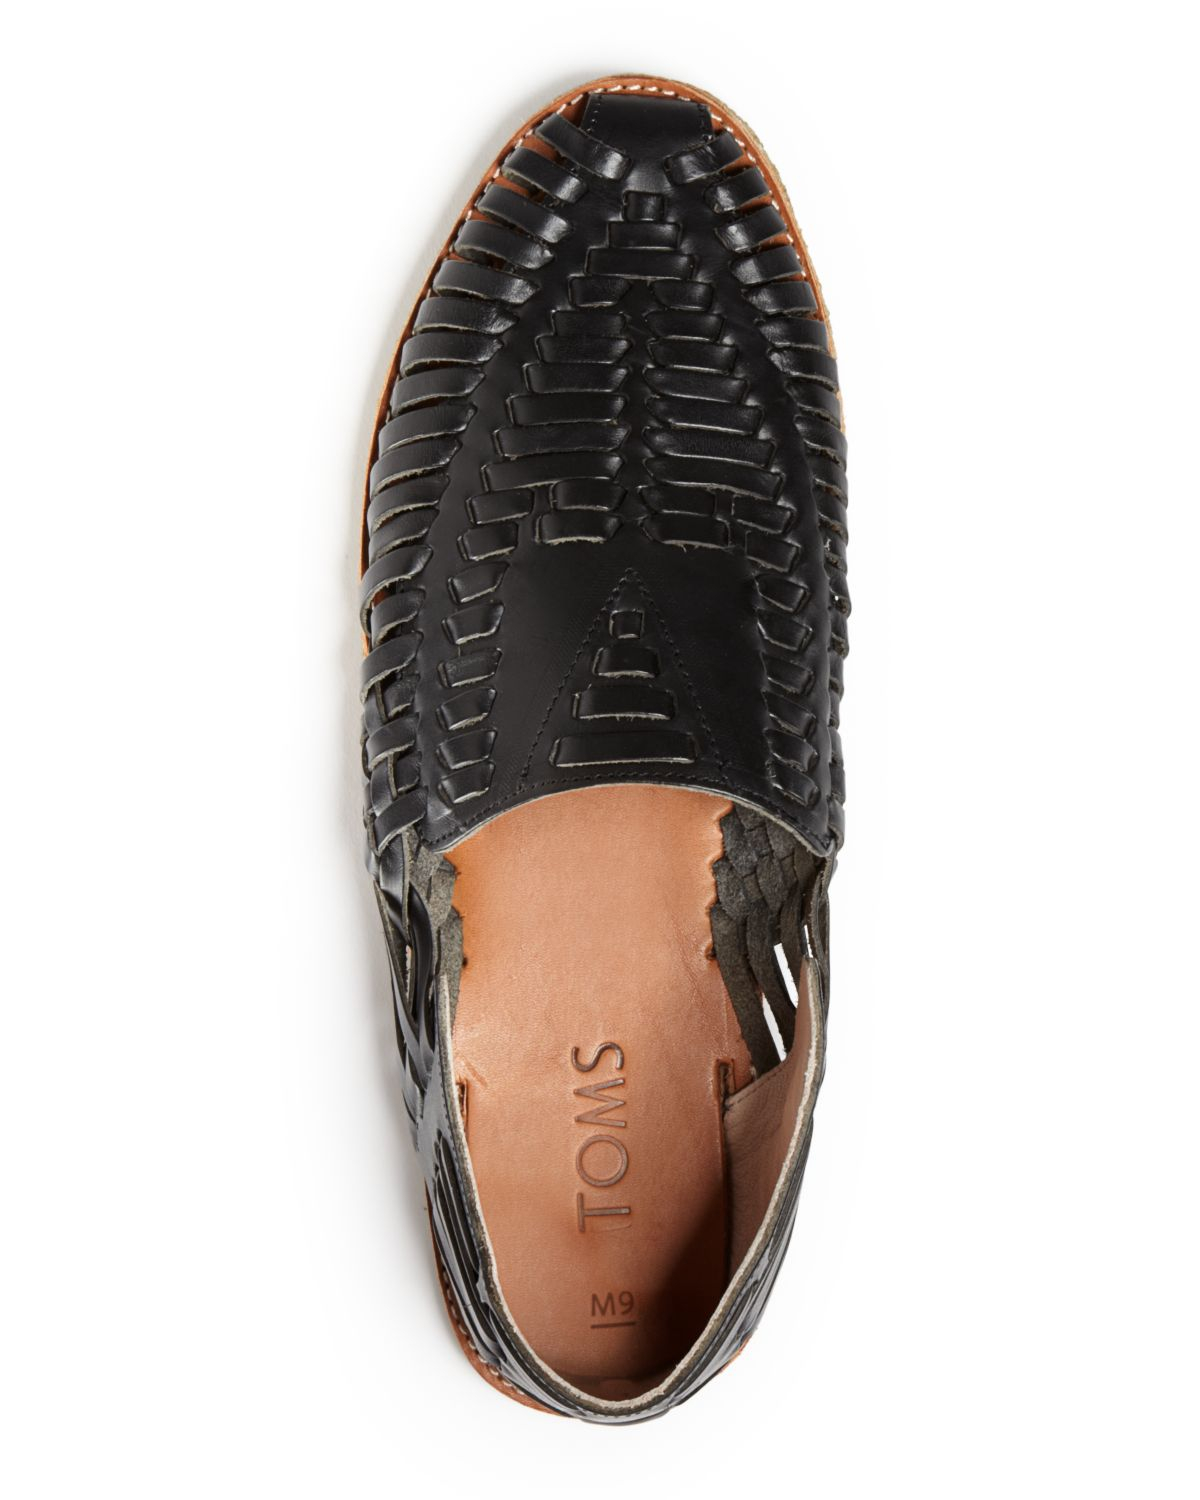 Råd Vind grill TOMS Huarache Woven Leather Loafers in Black for Men - Lyst